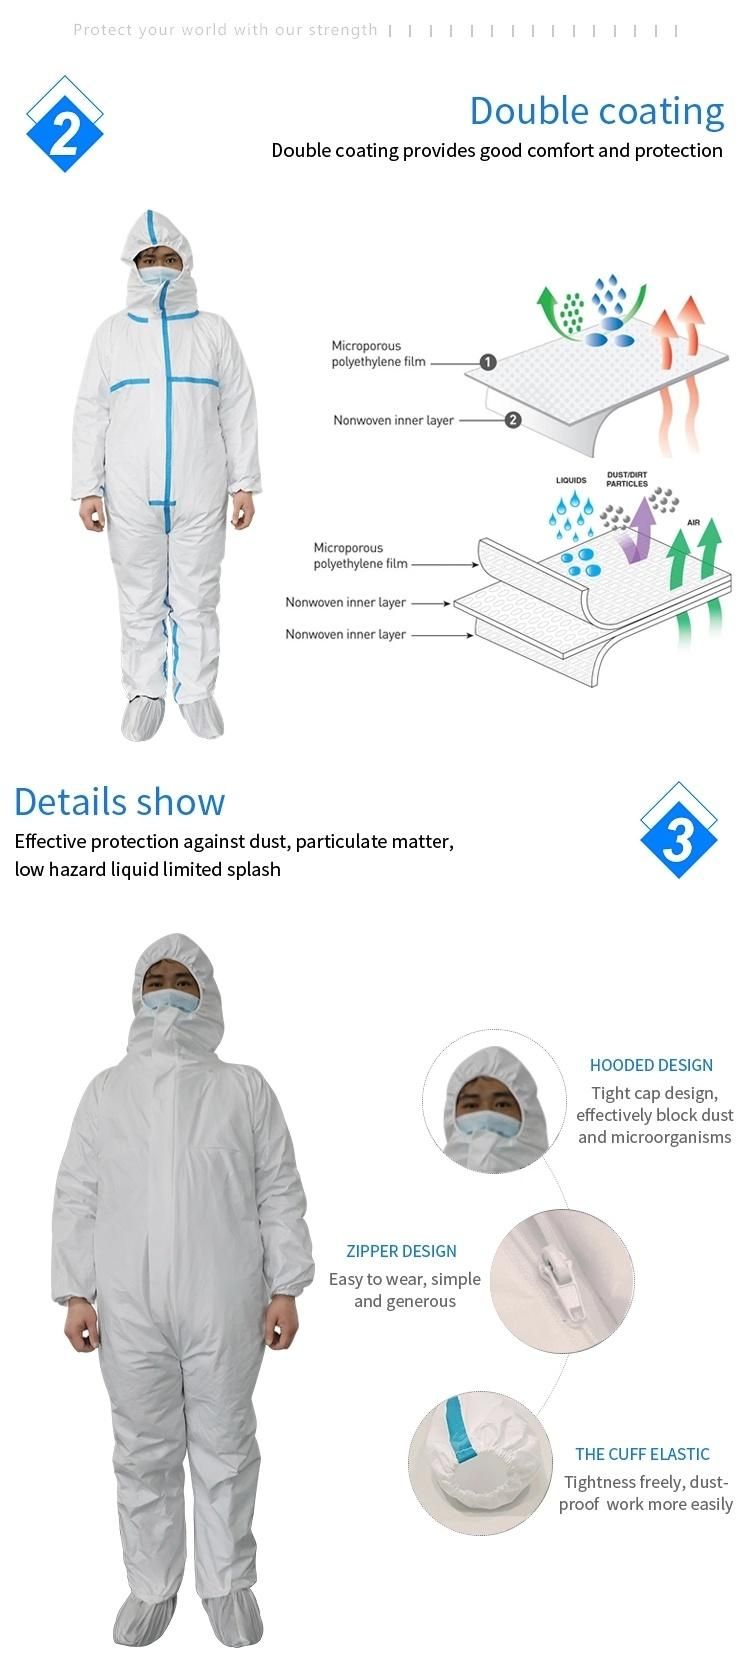 Protective Clothing Coverall Suit Disposable Isolation Gown Body Suit PPE Personal Protection Protective Equipment